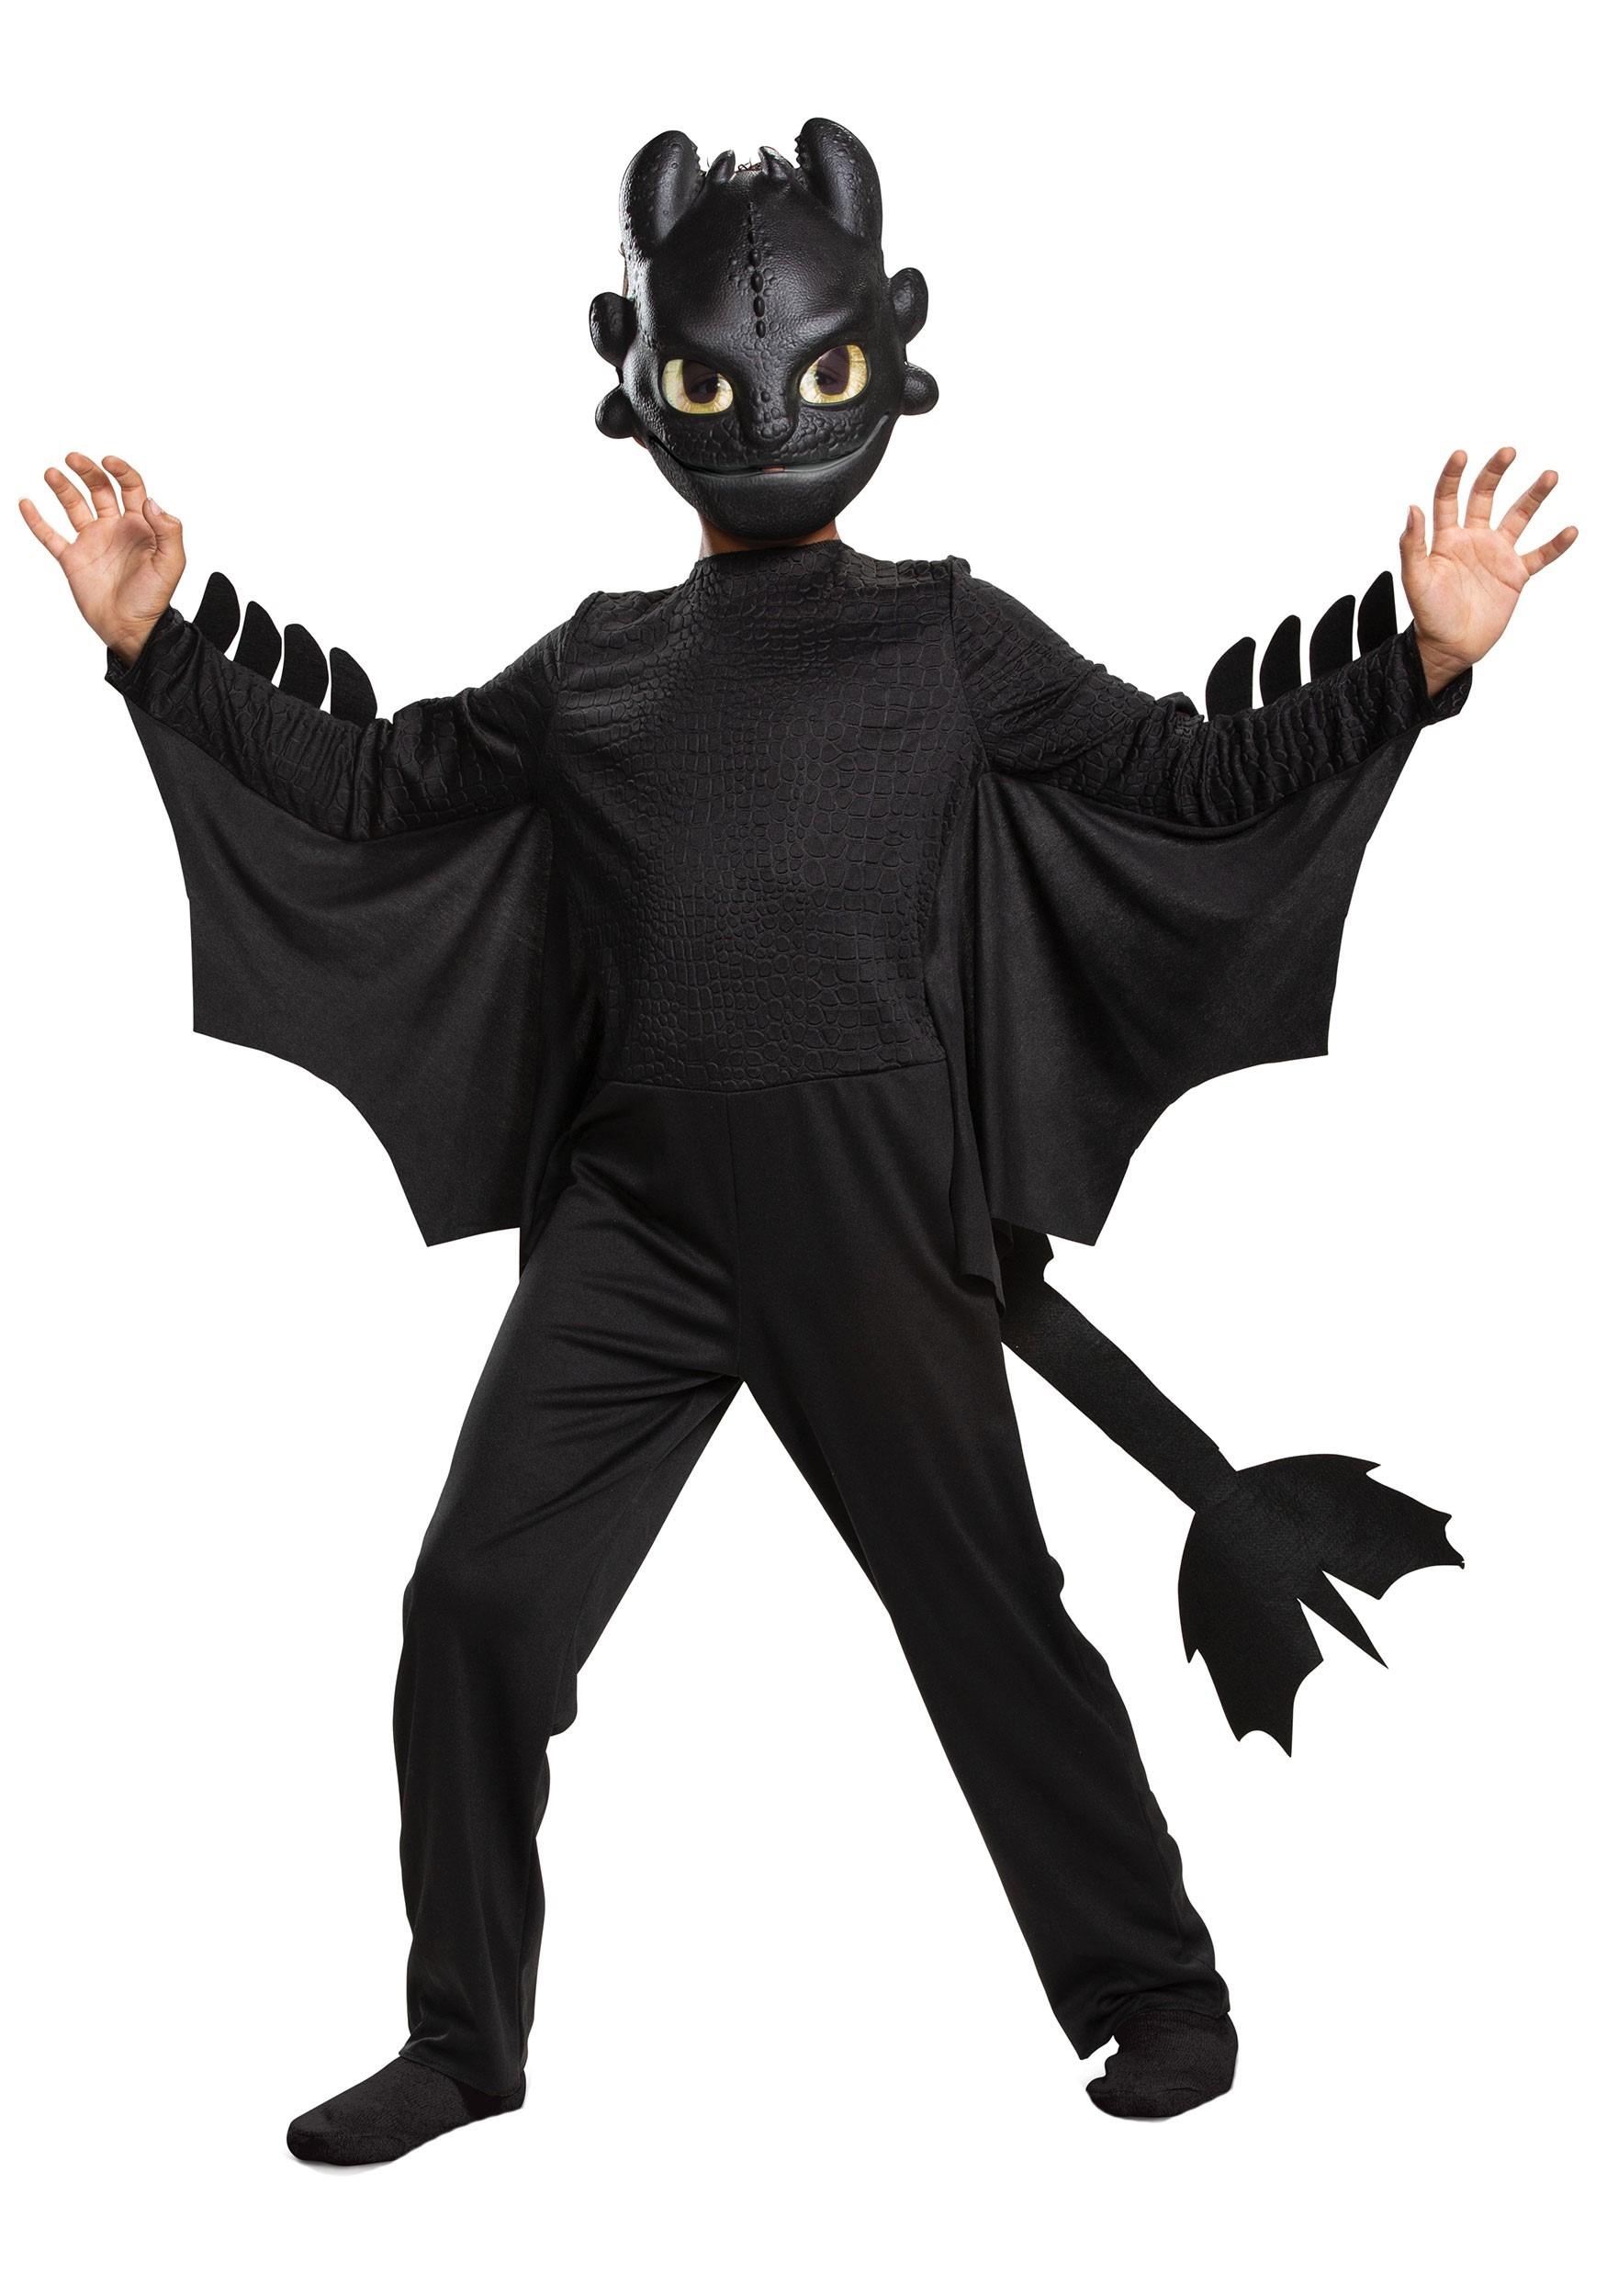 How to Train Your Dragon Toothless Classic Kid’s Costume